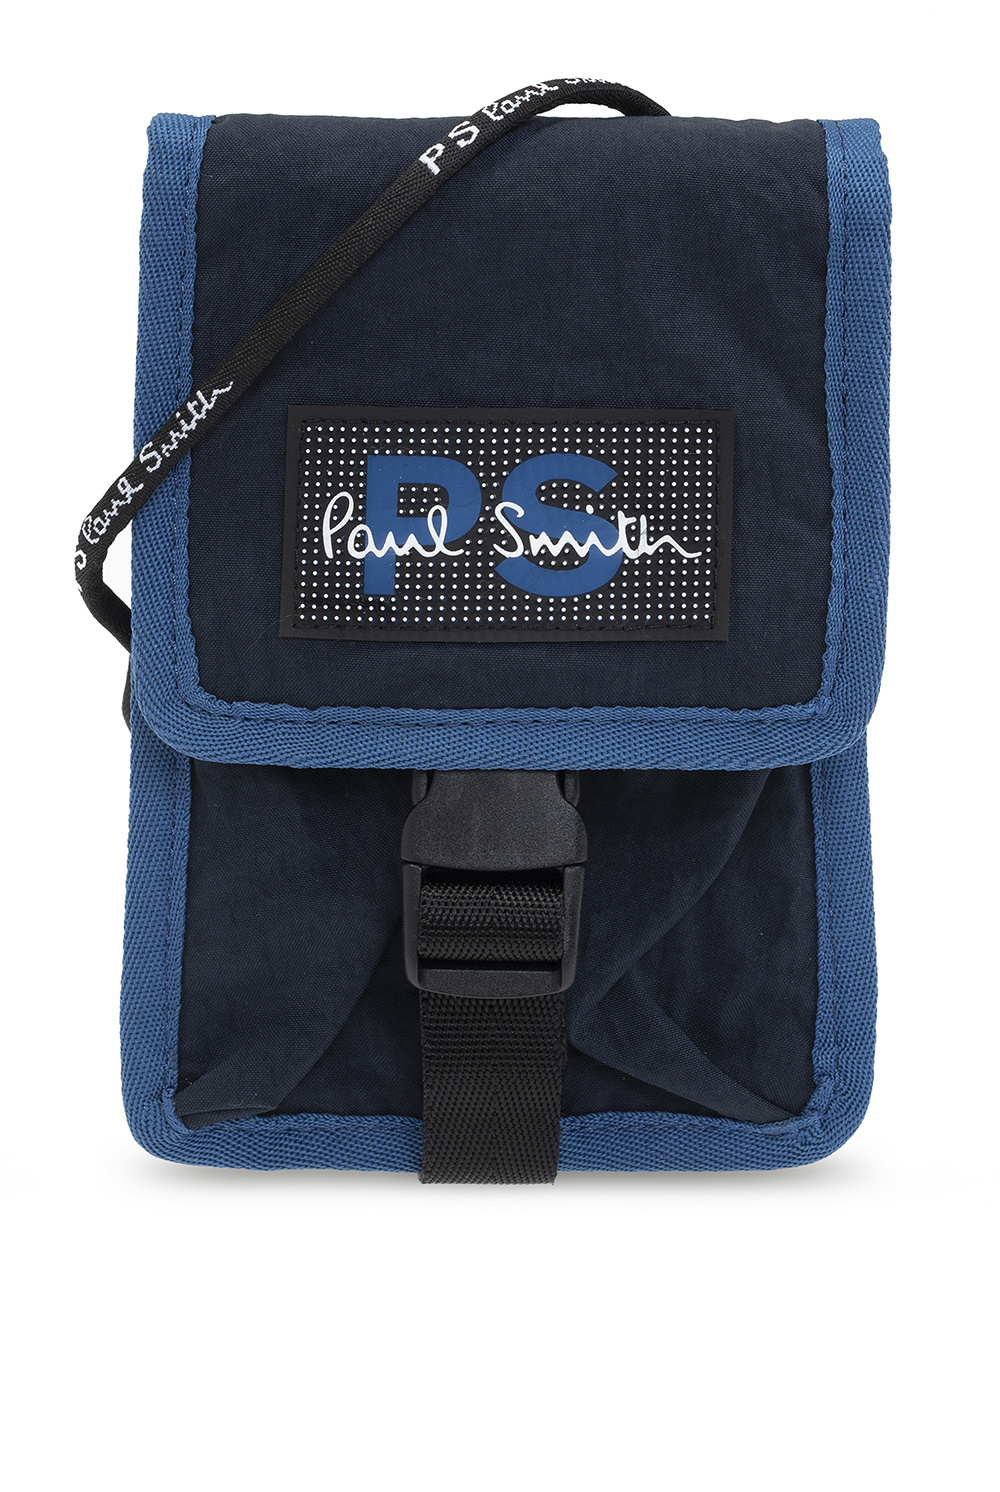 PS Paul Smith Strapped pouch